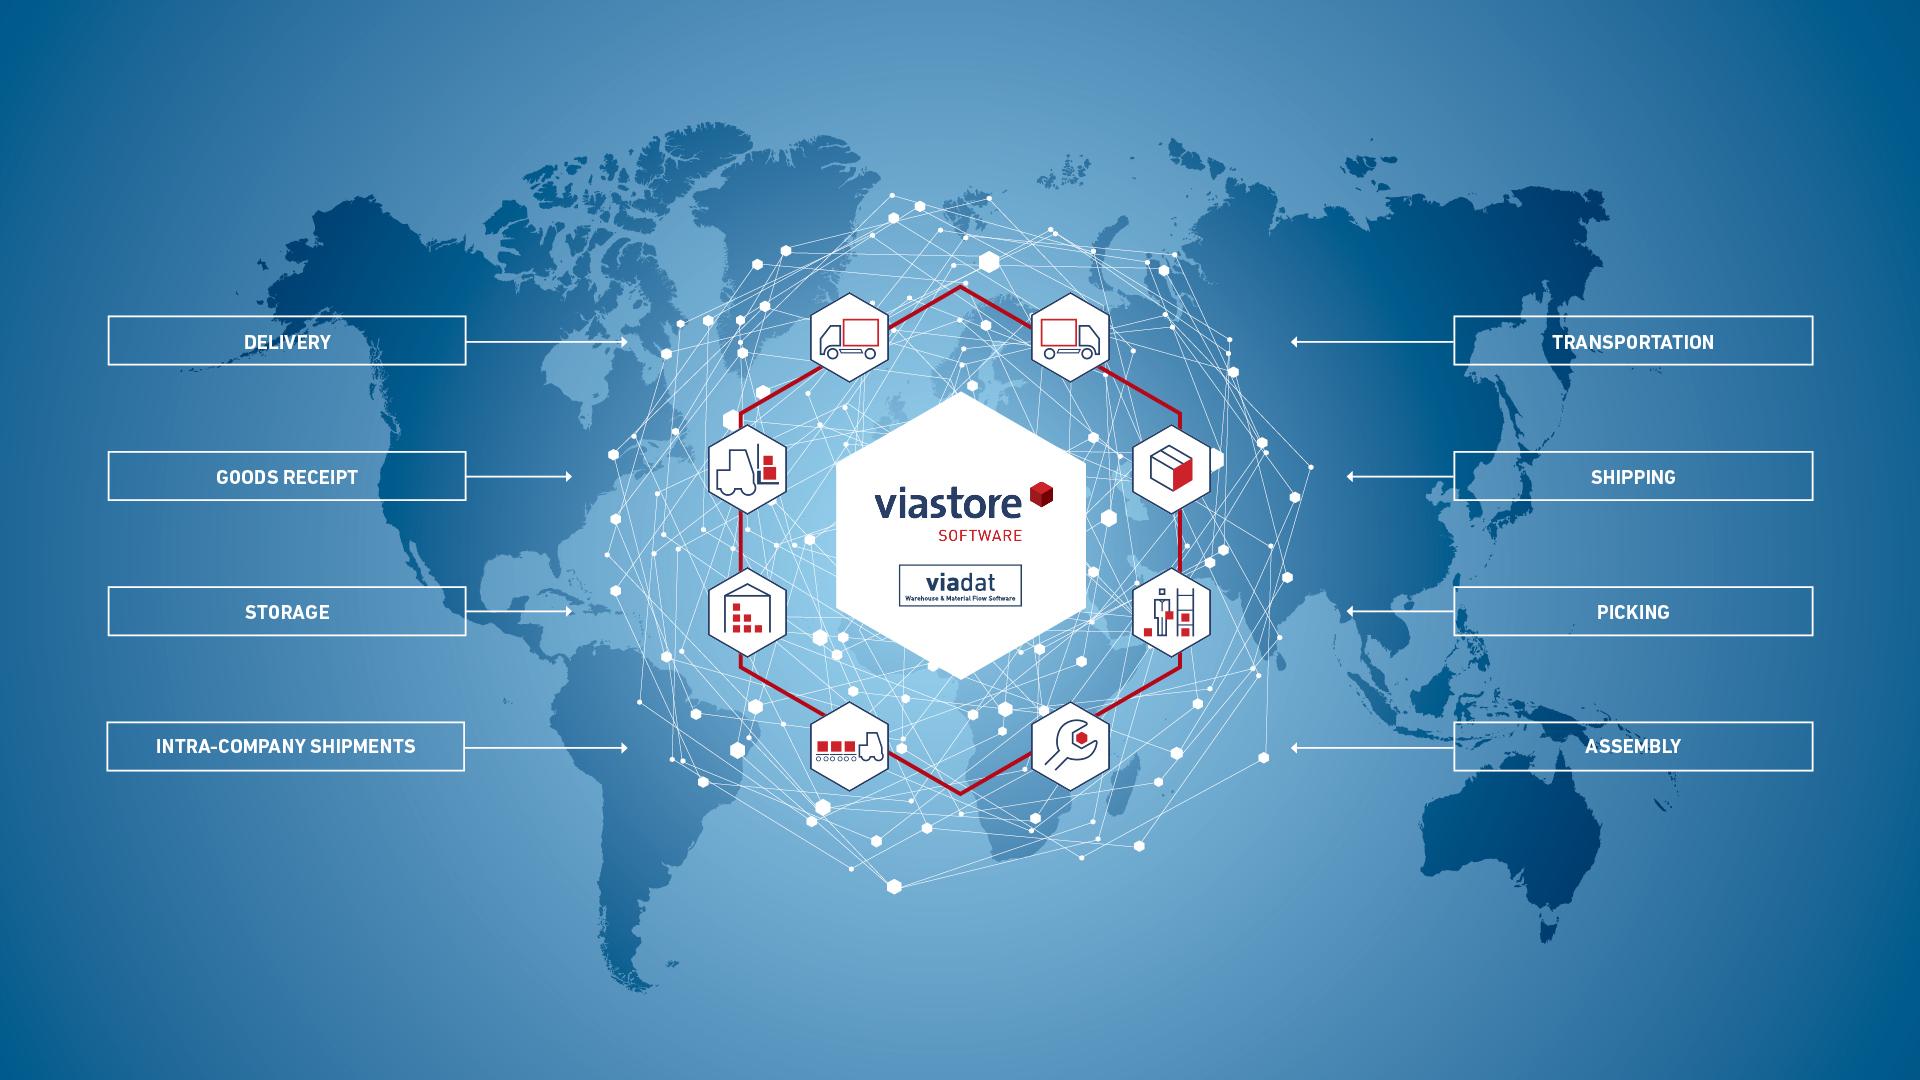 Application areas Warehouse management software viadat for networked material flows 